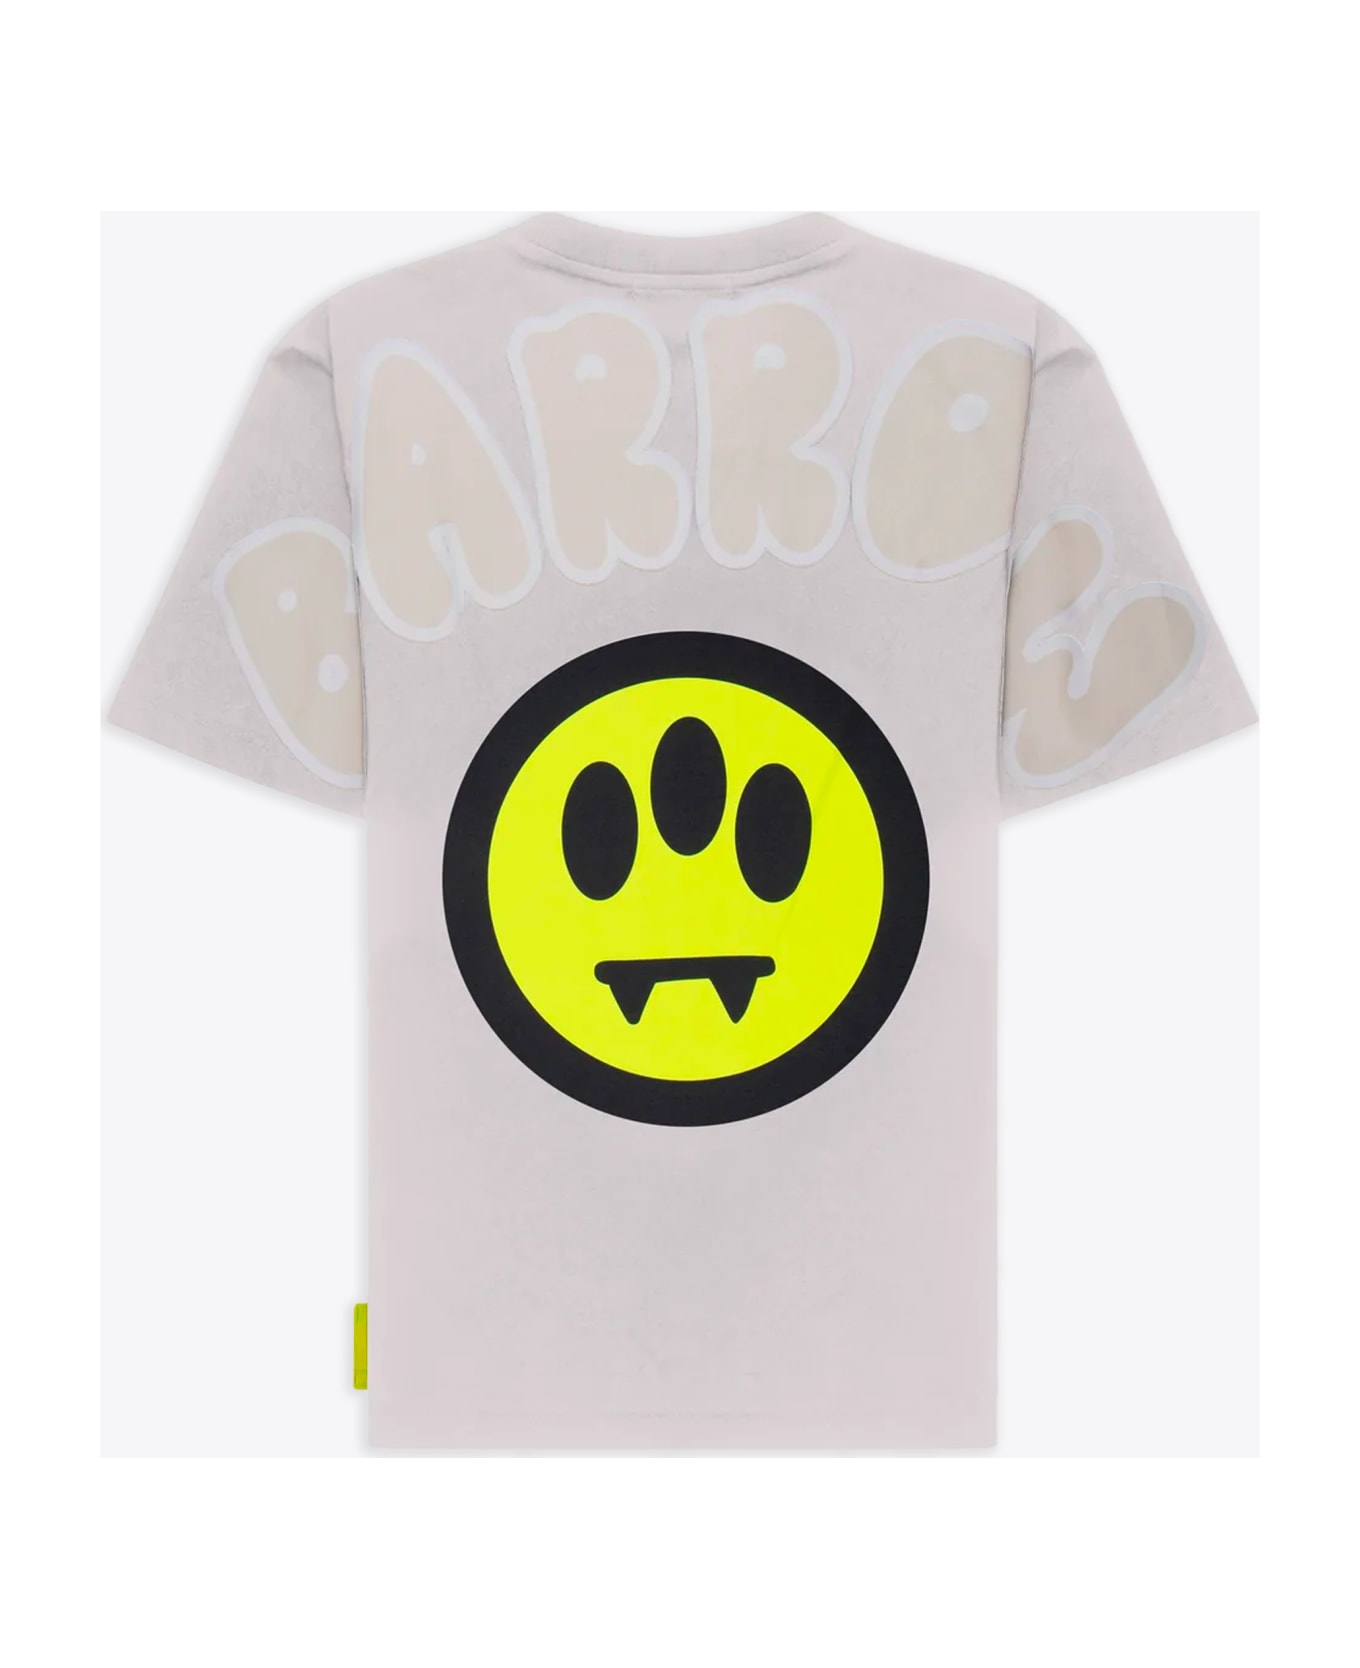 Barrow Jersey T-shirt Unisex Off white cotton t-shirt with front logo and back smile print - Crema